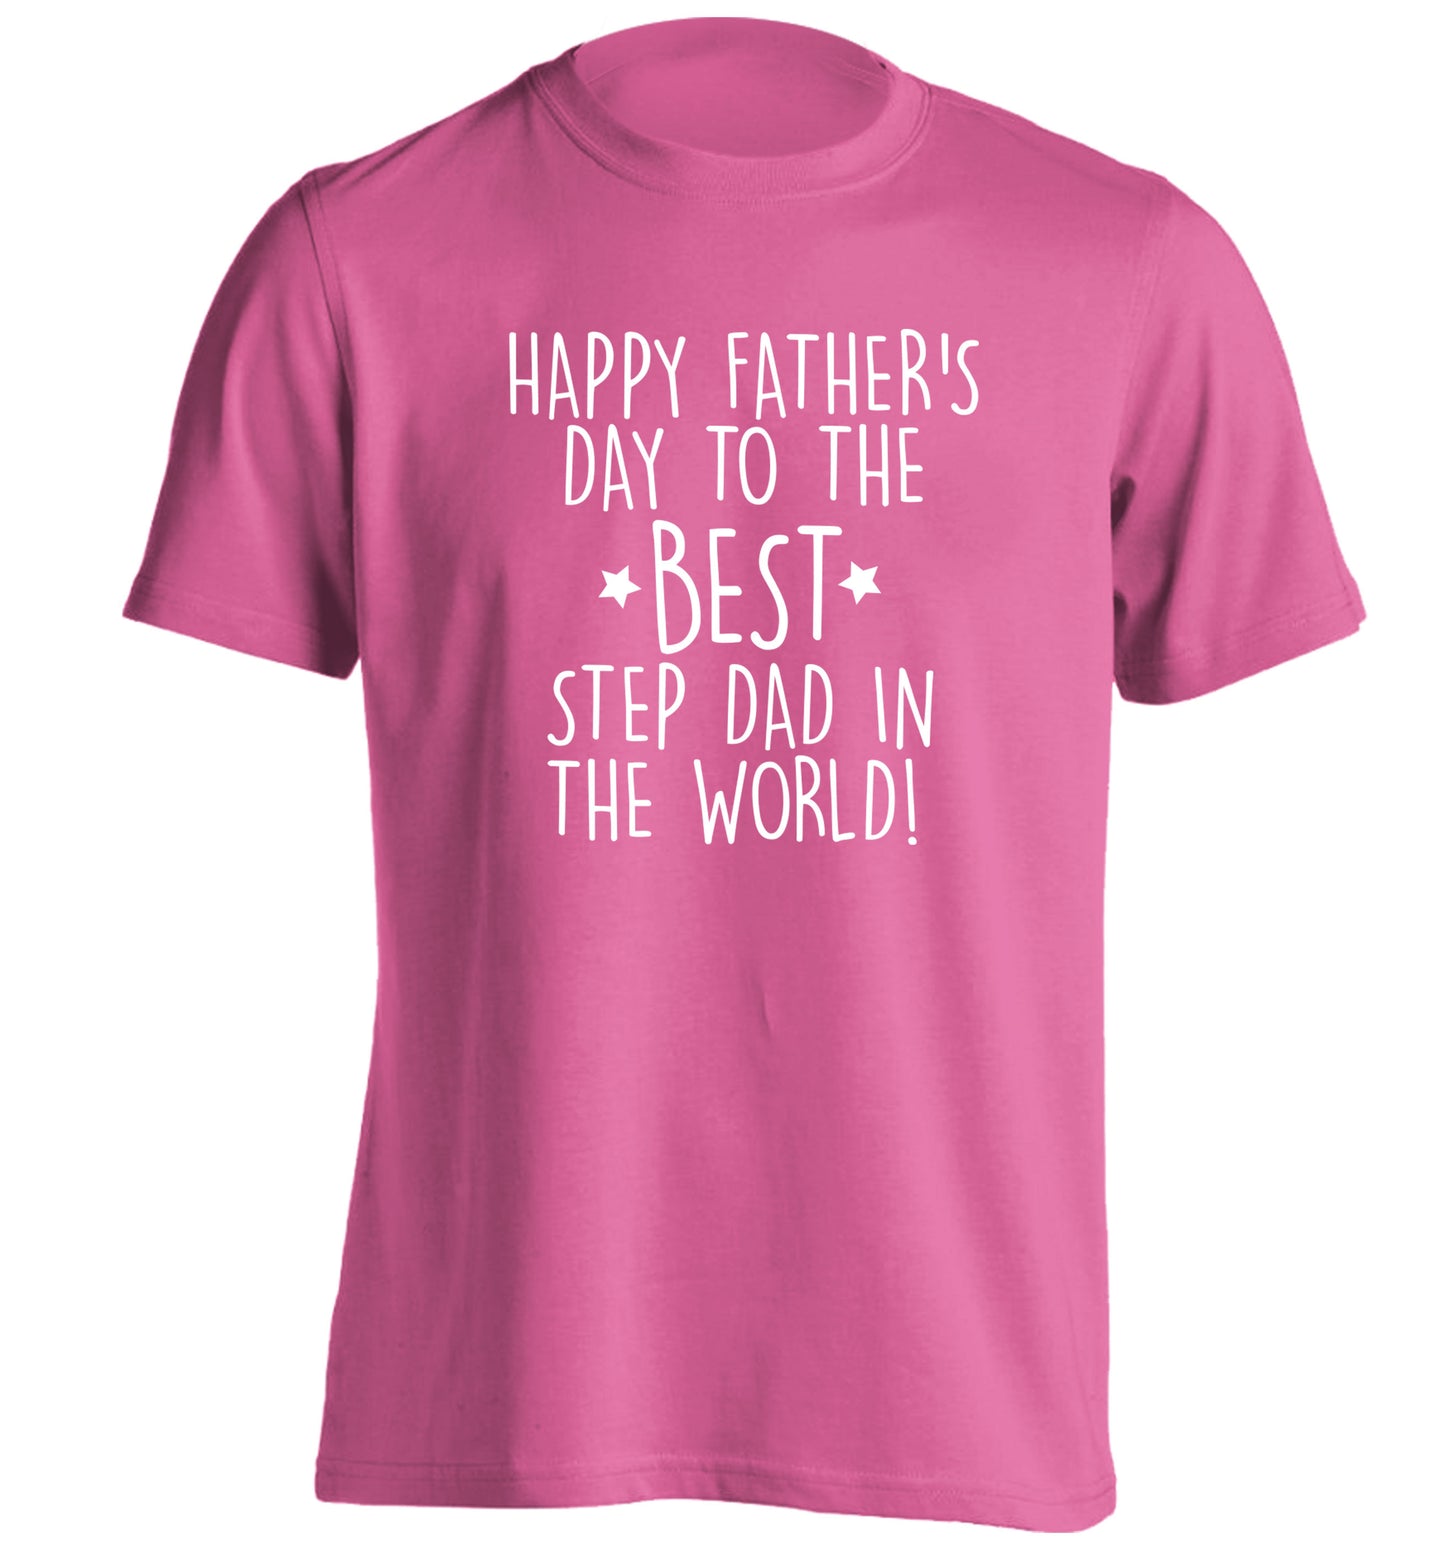 Happy Father's day to the best step dad in the world! adults unisex pink Tshirt 2XL